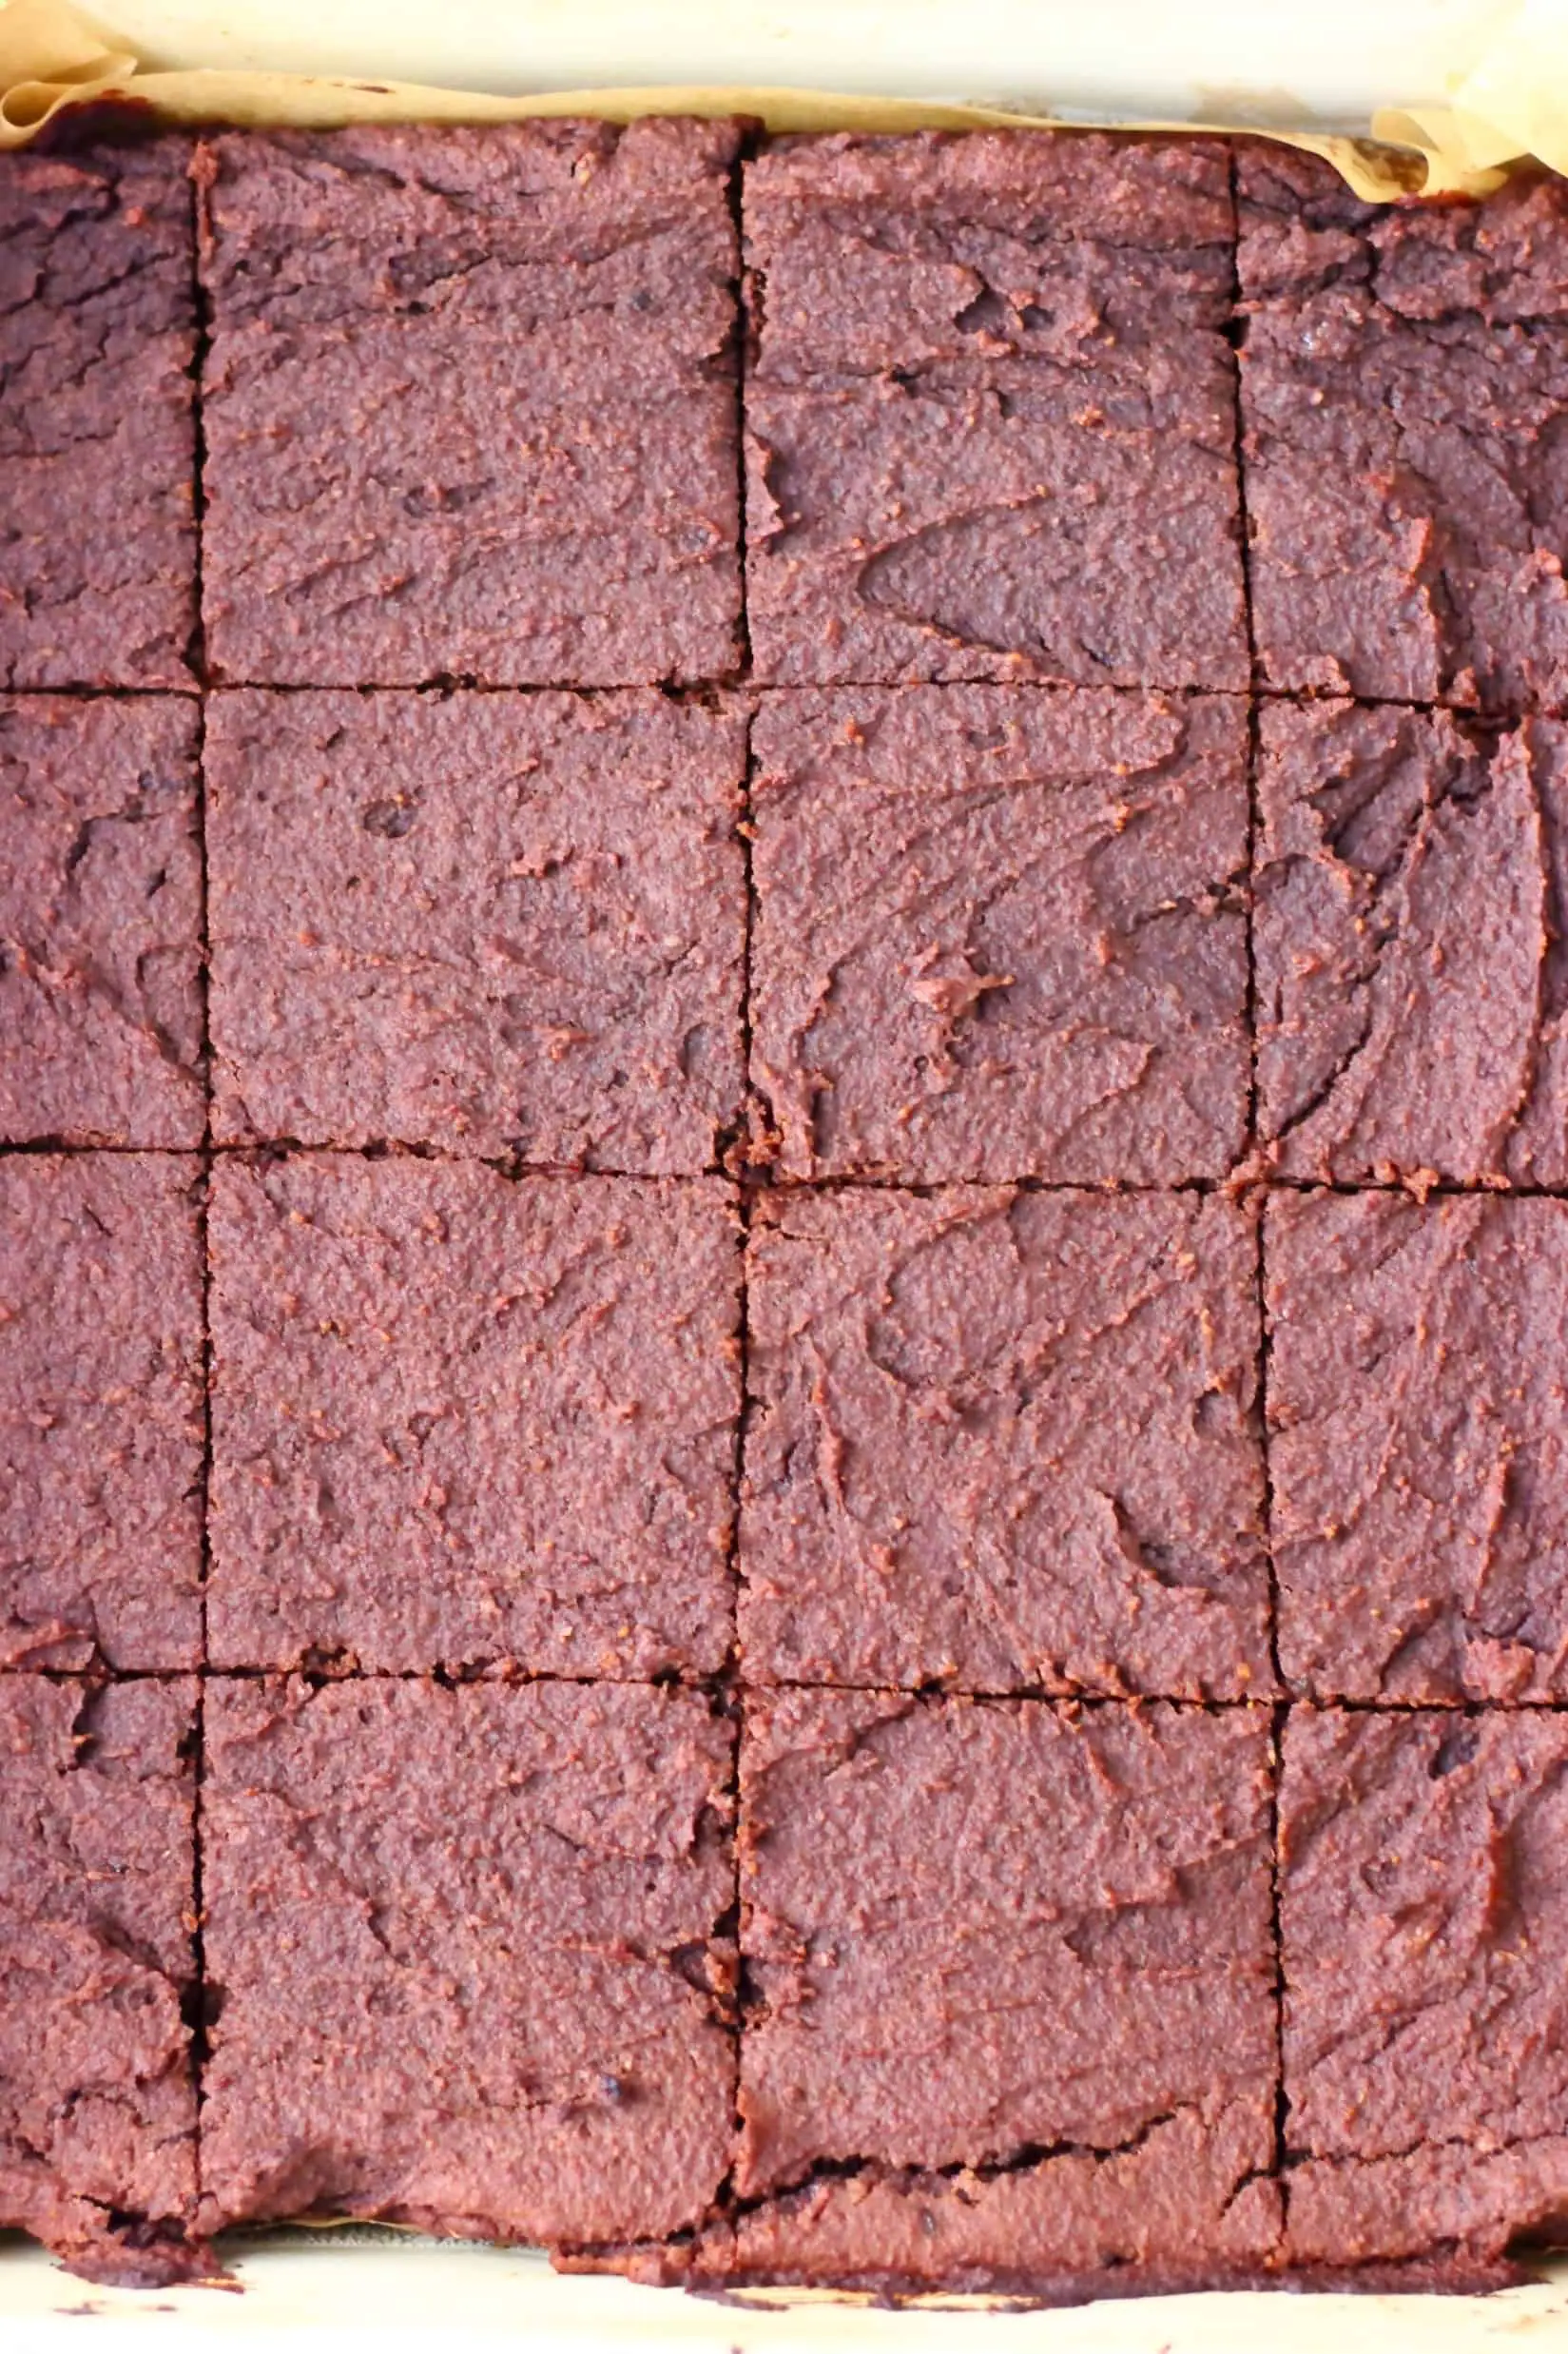 Baked sweet potato brownies cut into squares in a square baking tin lined with baking paper